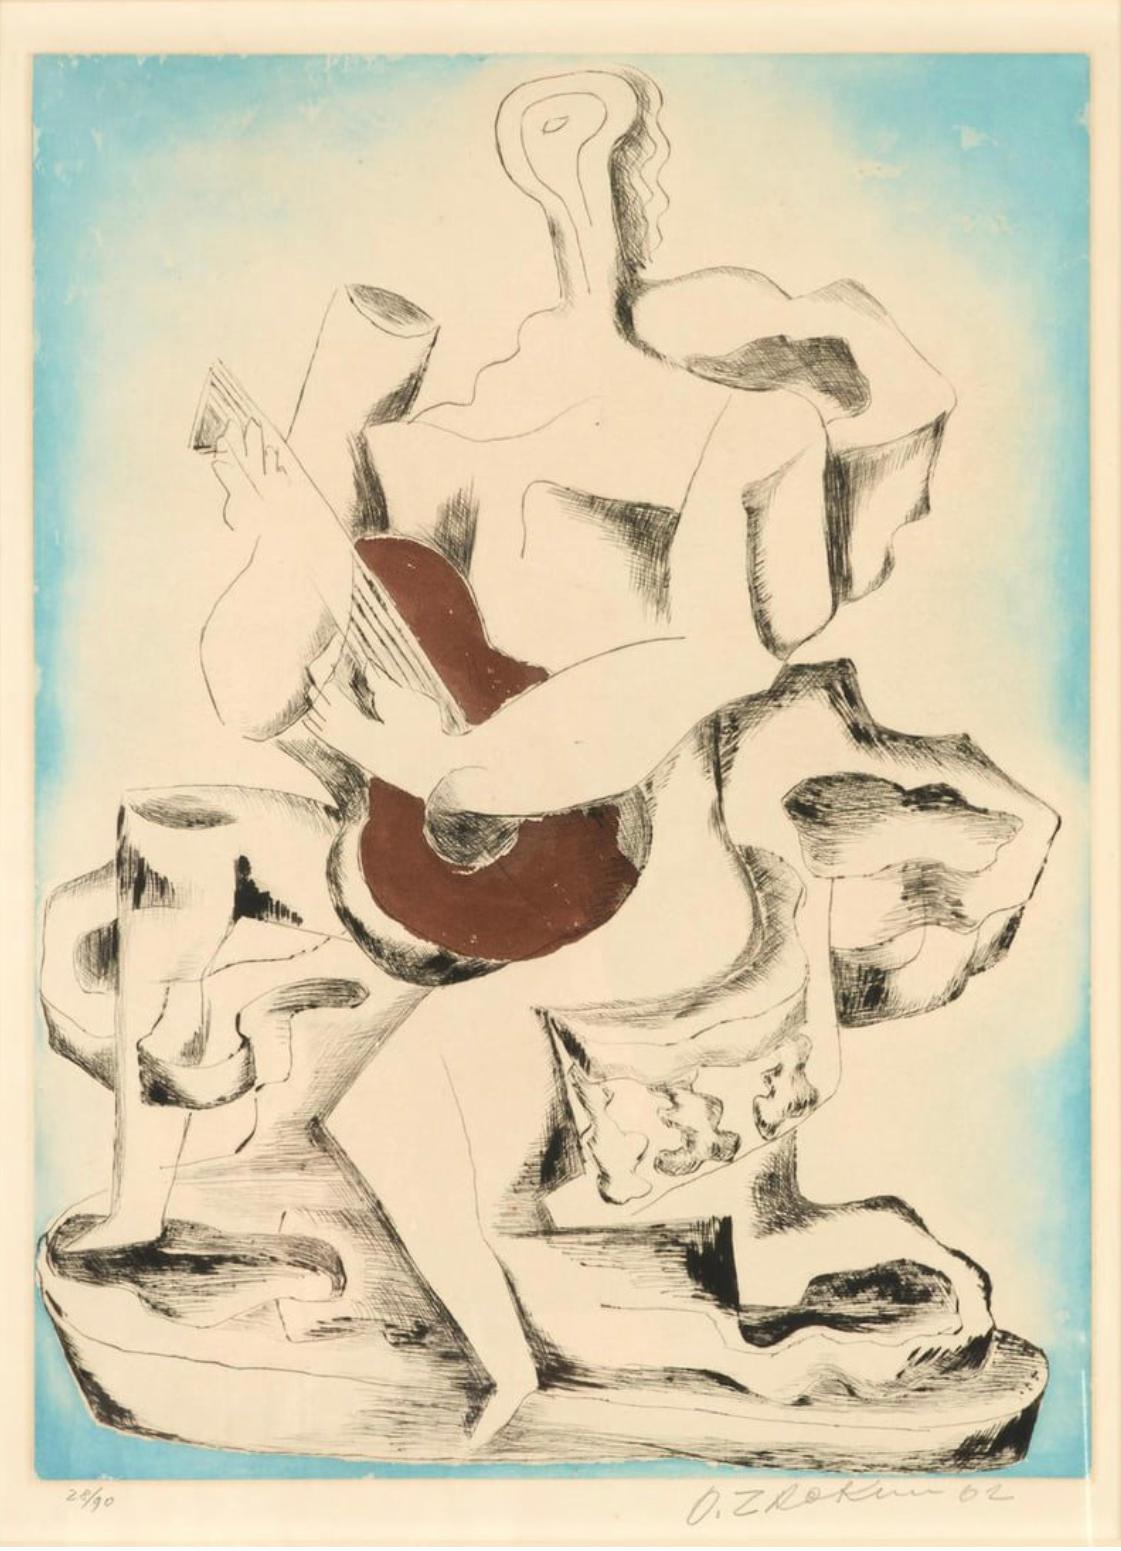 Etching and aquatint on paper, nicely matted and framed.  Edition 28 of 90, signed and dated in pencil lower right.  Cubist work featuring a girl and her guitar.  
Ossip Zadkine 1888 - 1967
Painter and sculptor Ossip Zadkine was born in Vitebsk, in